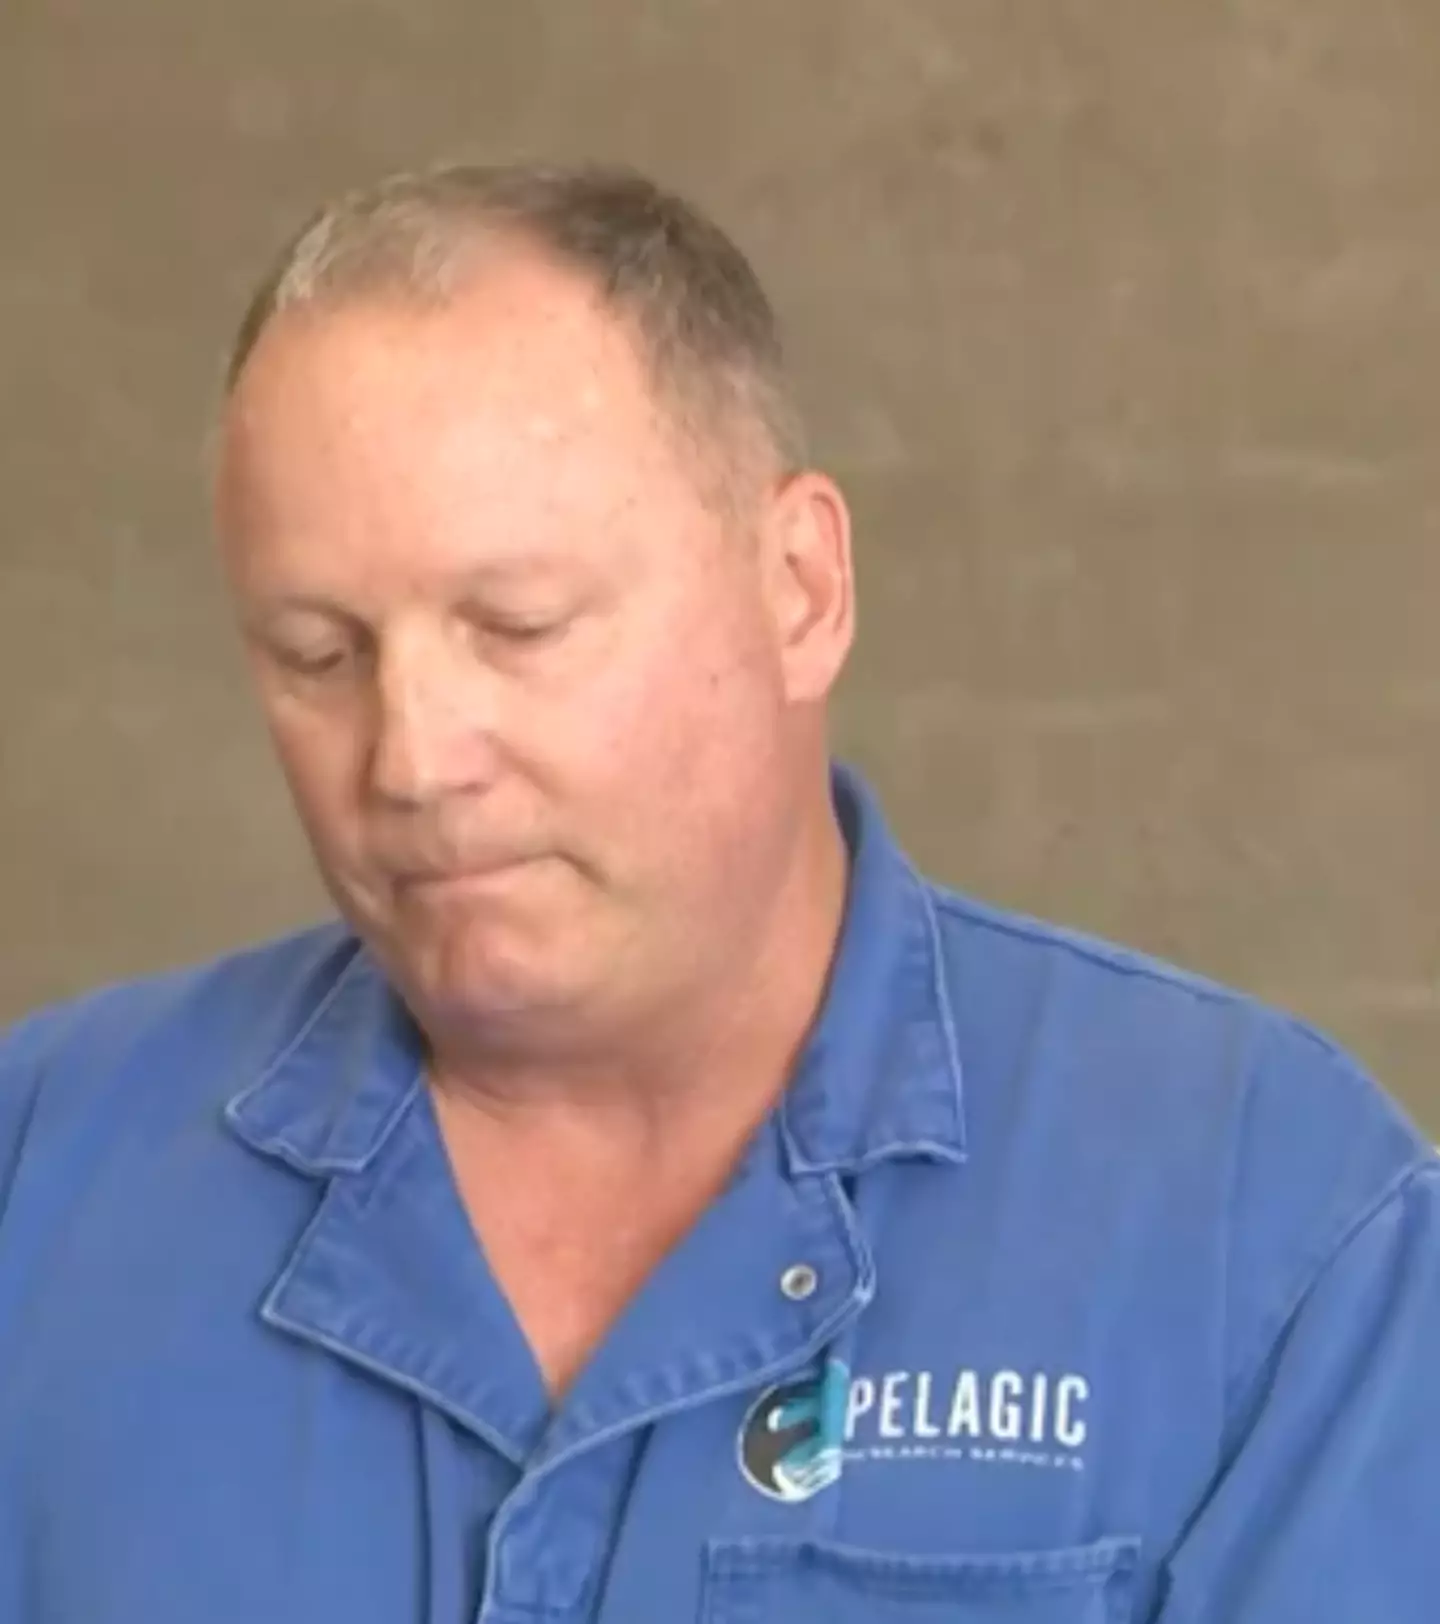 Ed Carrasco from Pelagic Research Services teared up as he remembered their grim discovery.